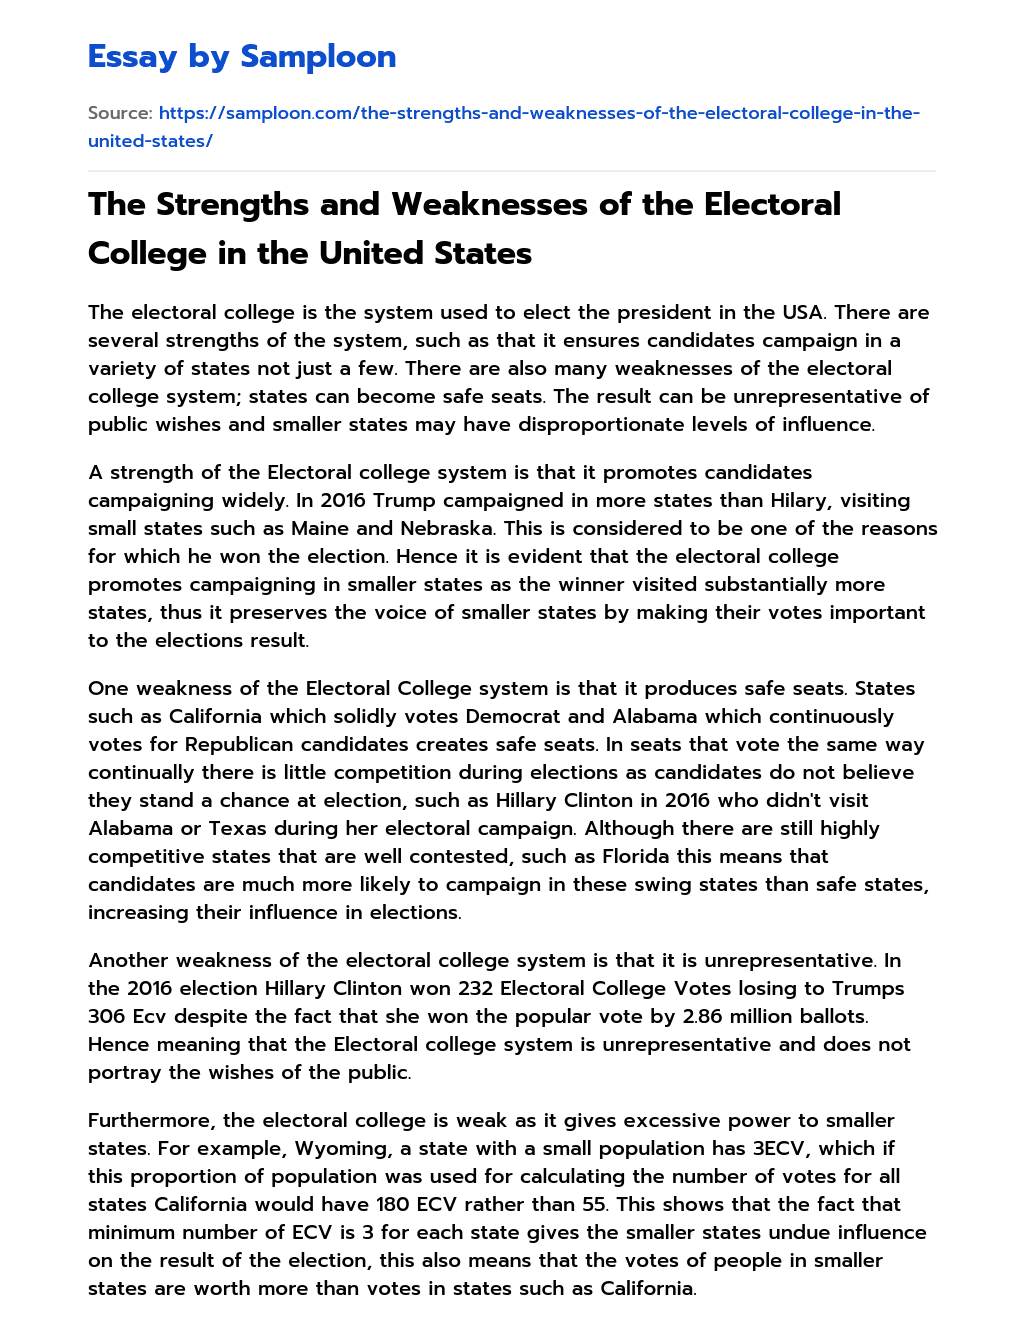 The Strengths and Weaknesses of the Electoral College in the United States essay